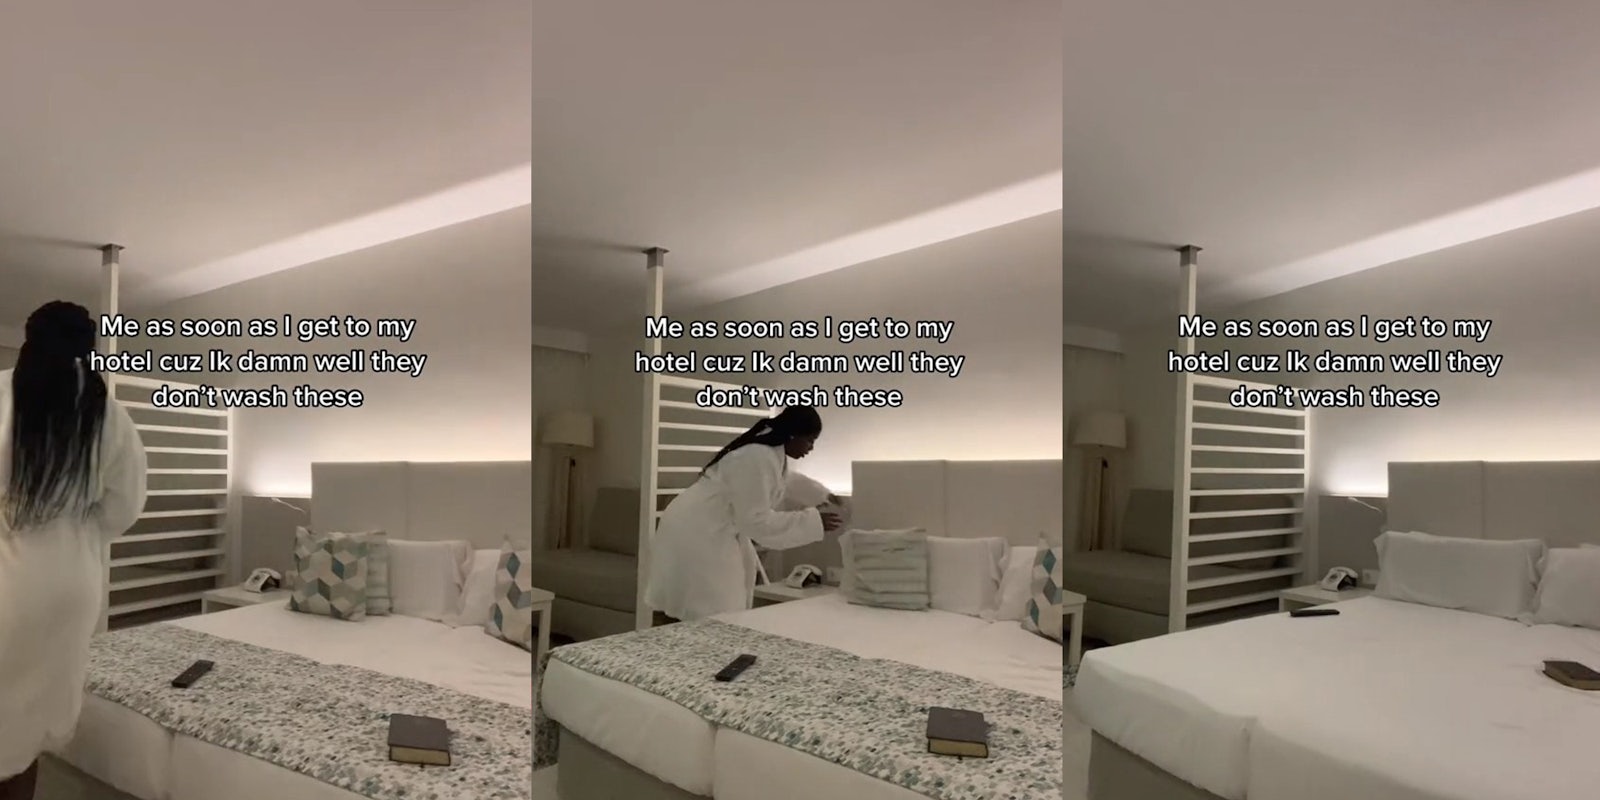 Former housekeeper removes all the pillows and covers from hotel bed since they are not cleaned